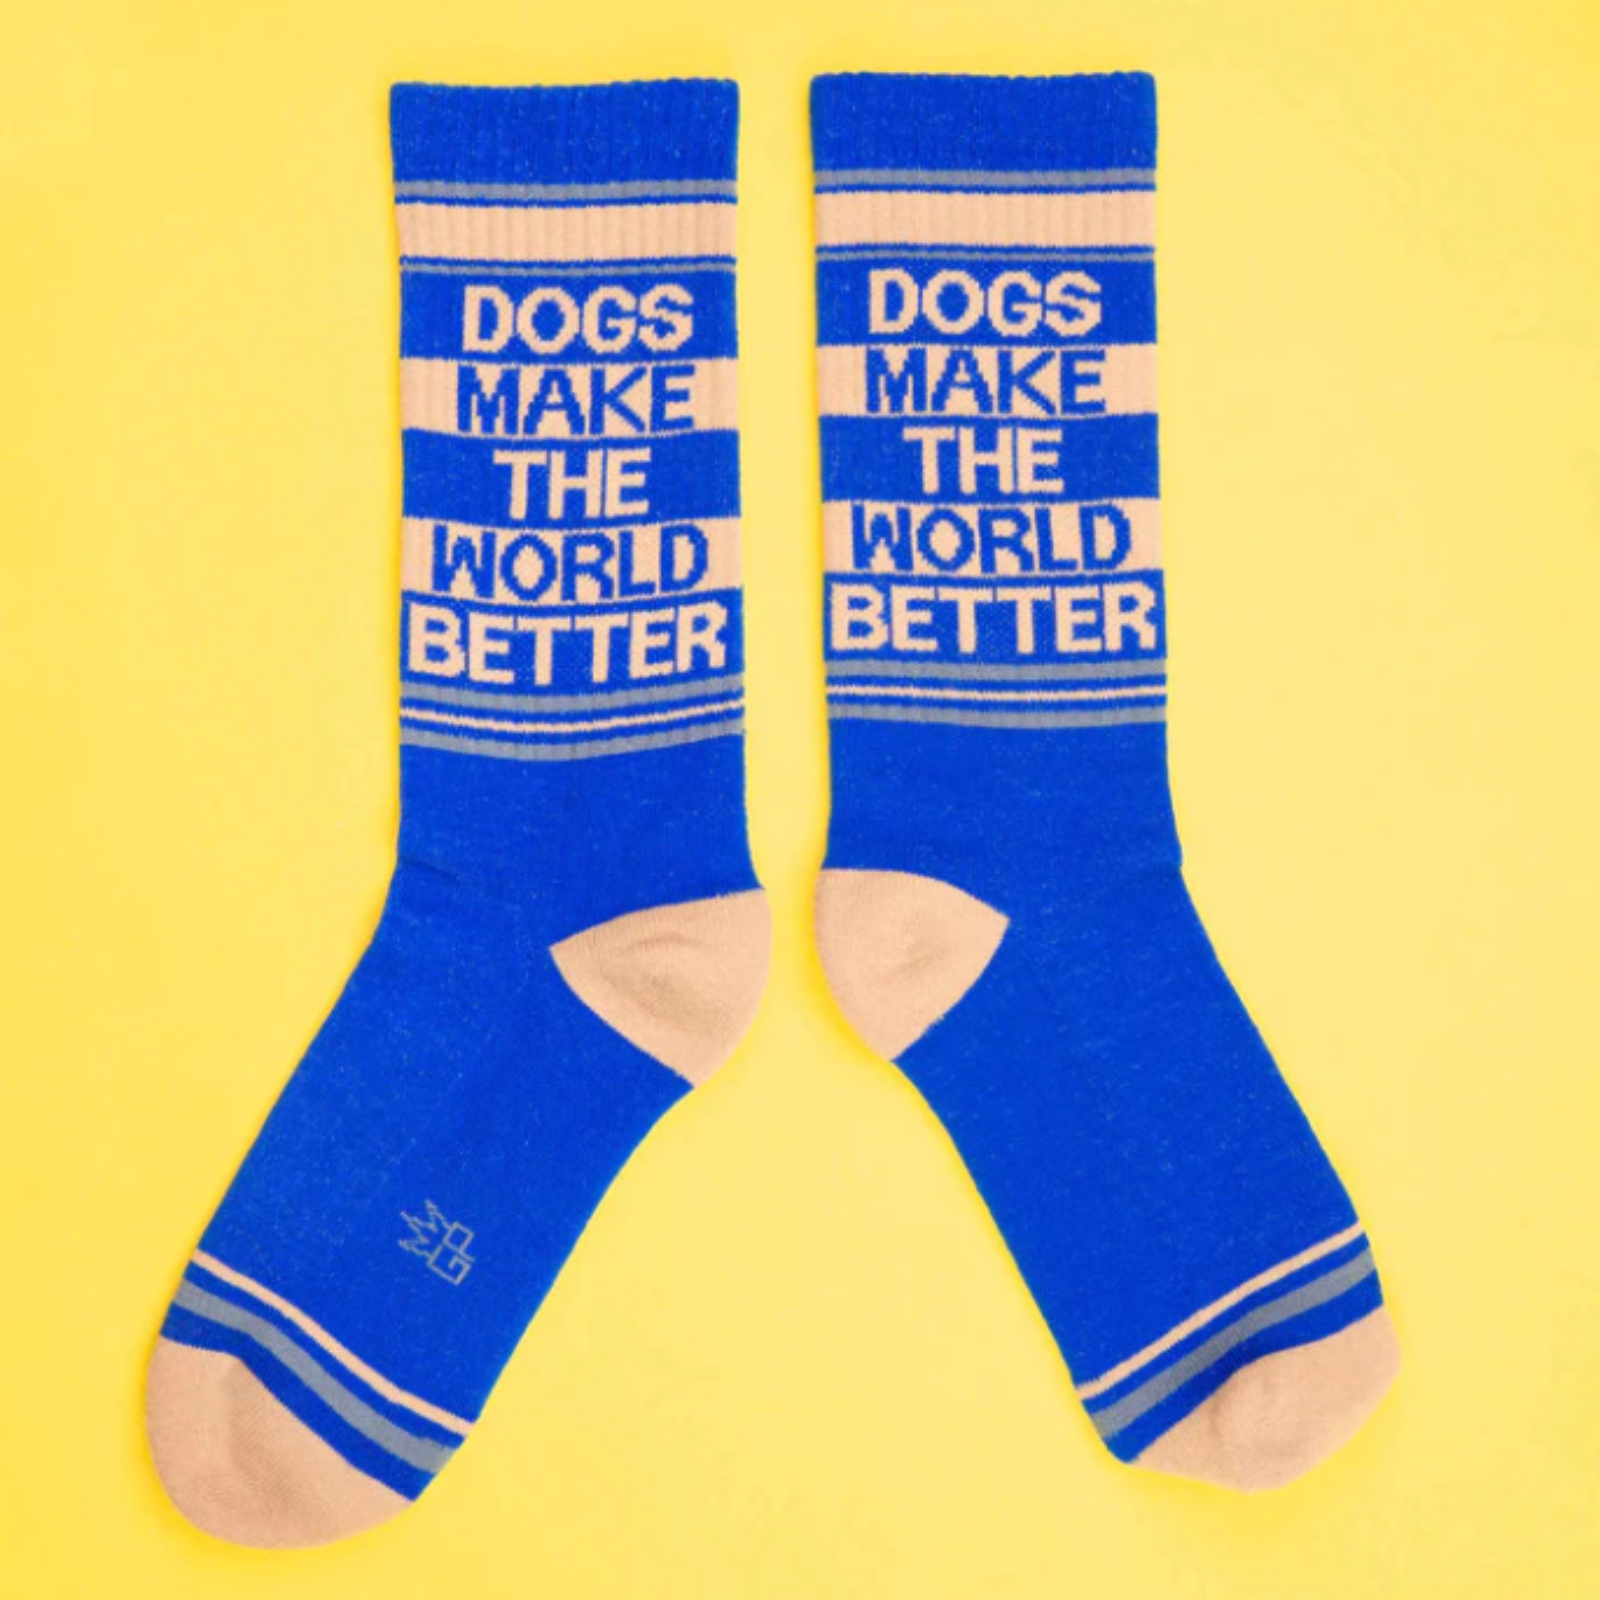 Gumball Poodle Dogs Make the World Better women's and men's sock featuring blue sock with "Dogs Make the World Better" in all capital letters on display